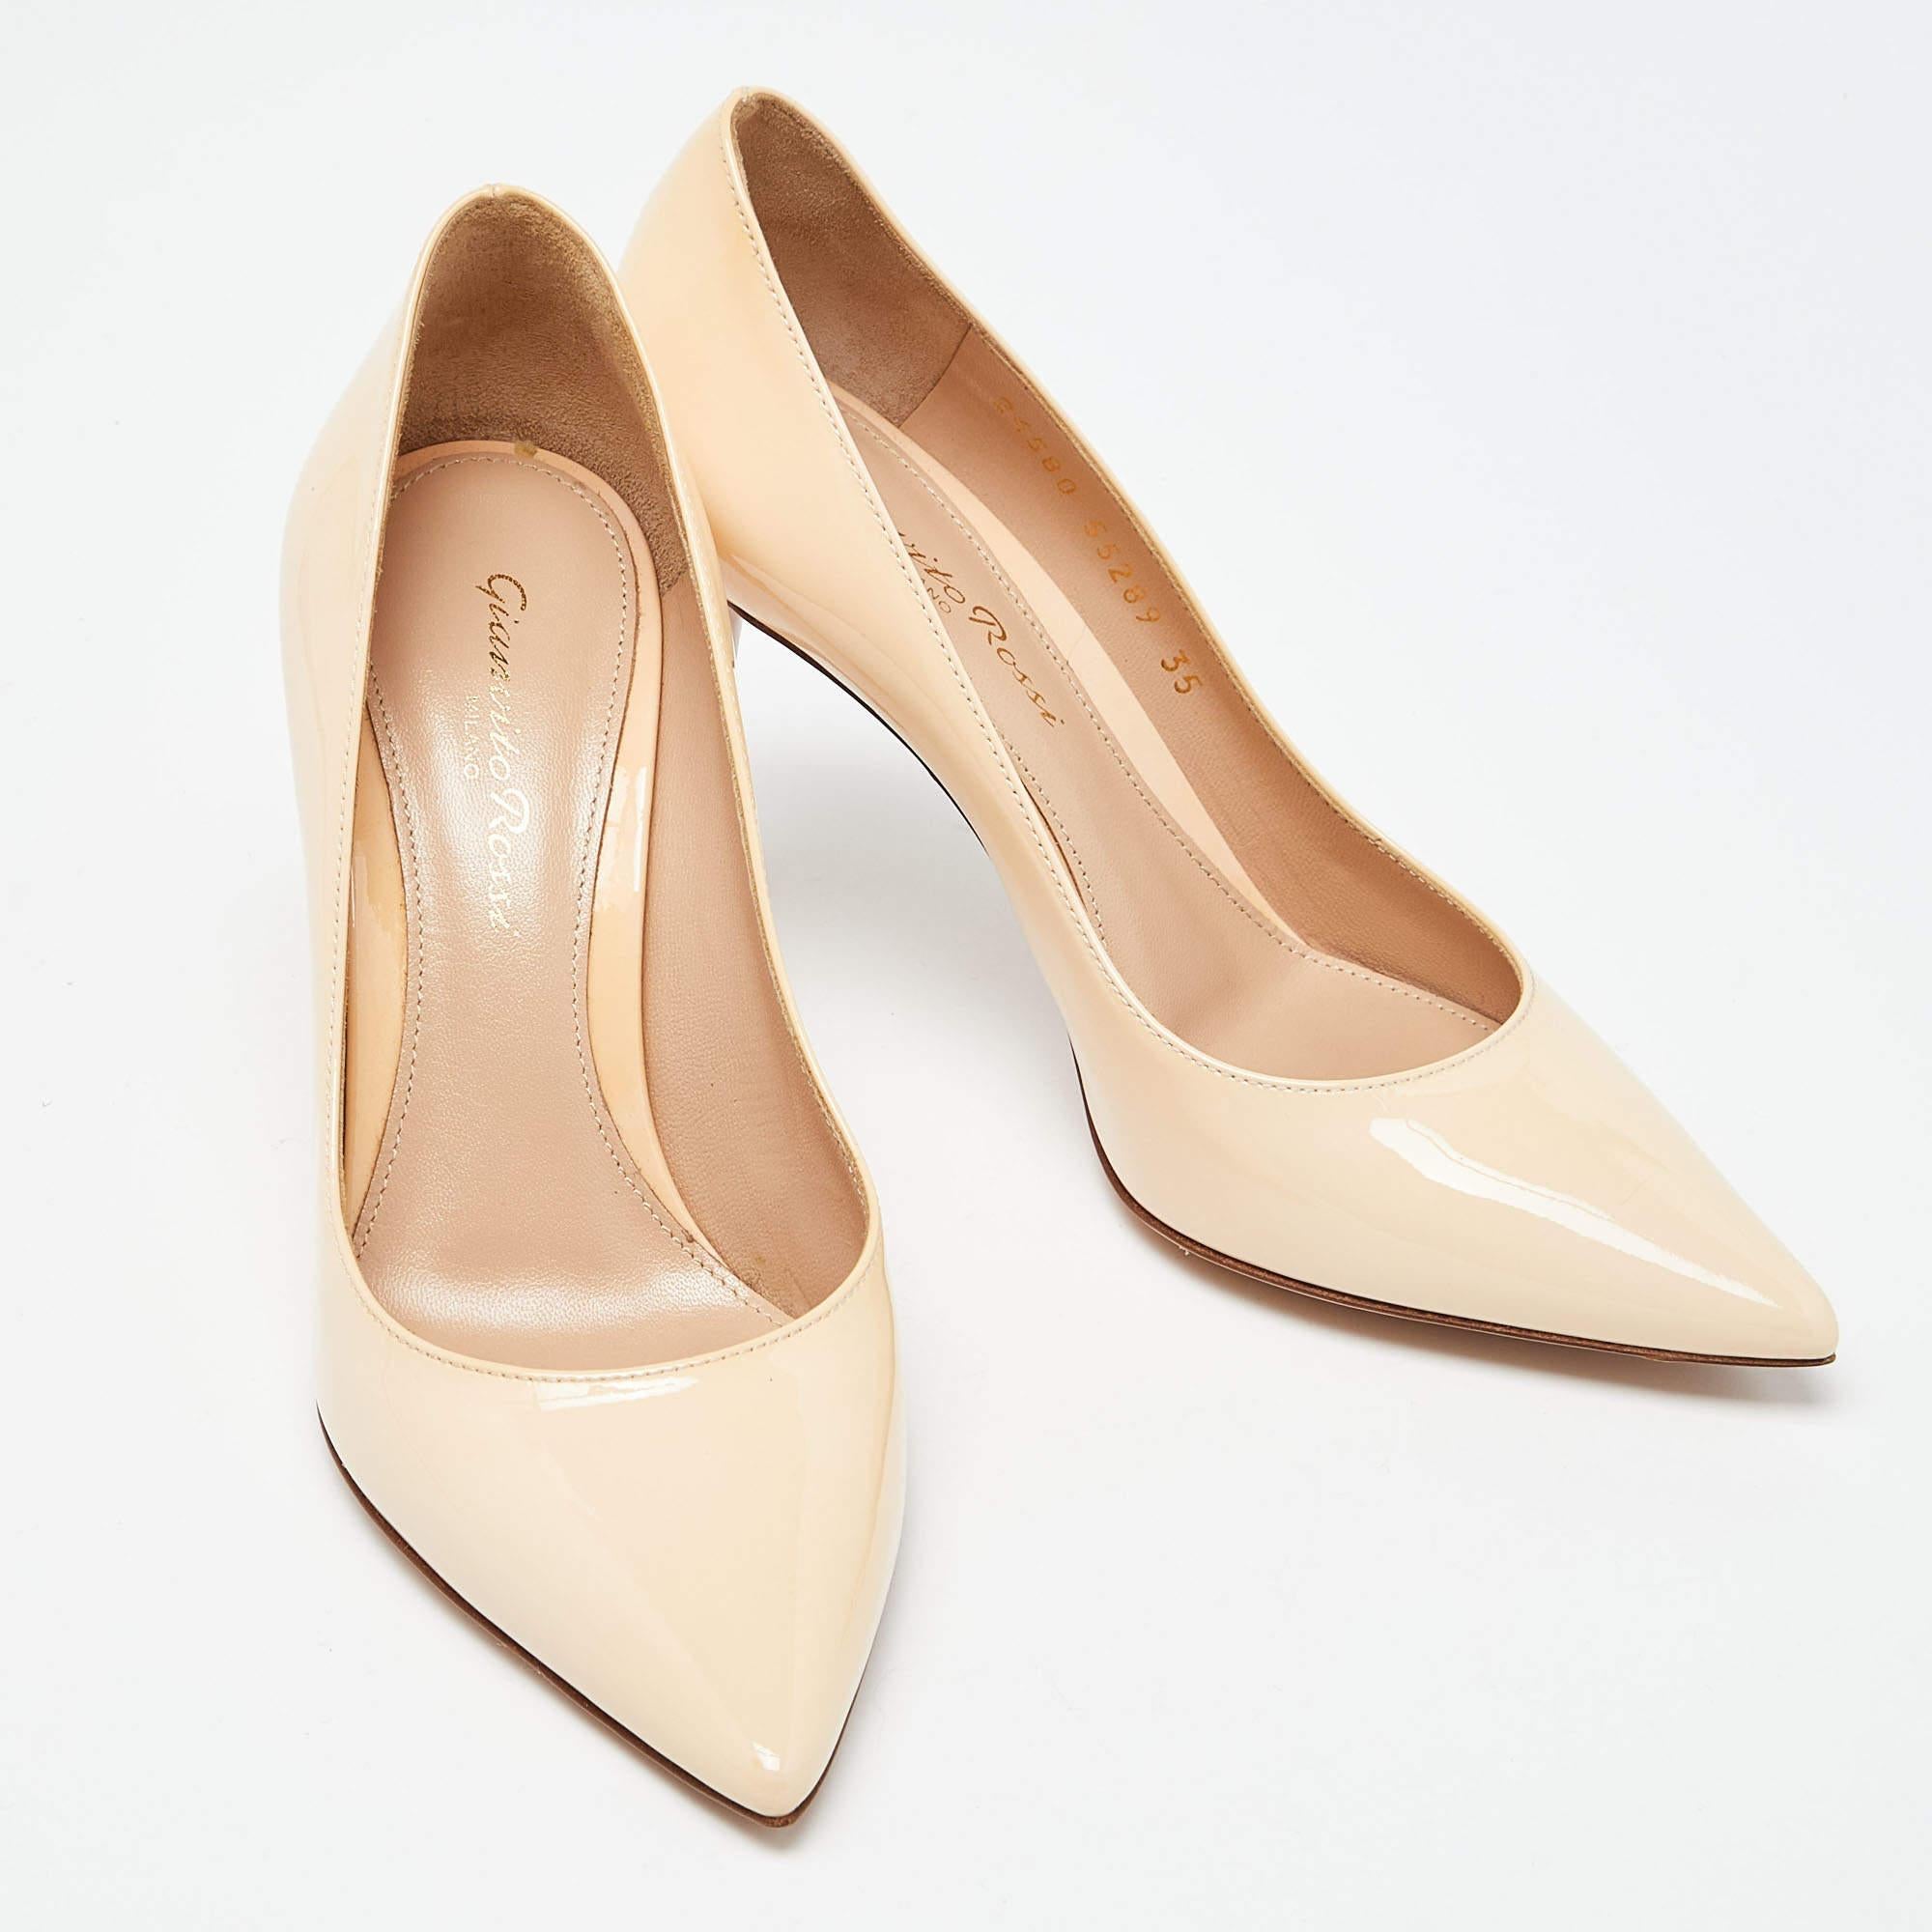 Gianvito Rossi Beige Patent Leather Gianvito 85 Pointed Toe Pumps Size 35 For Sale 1